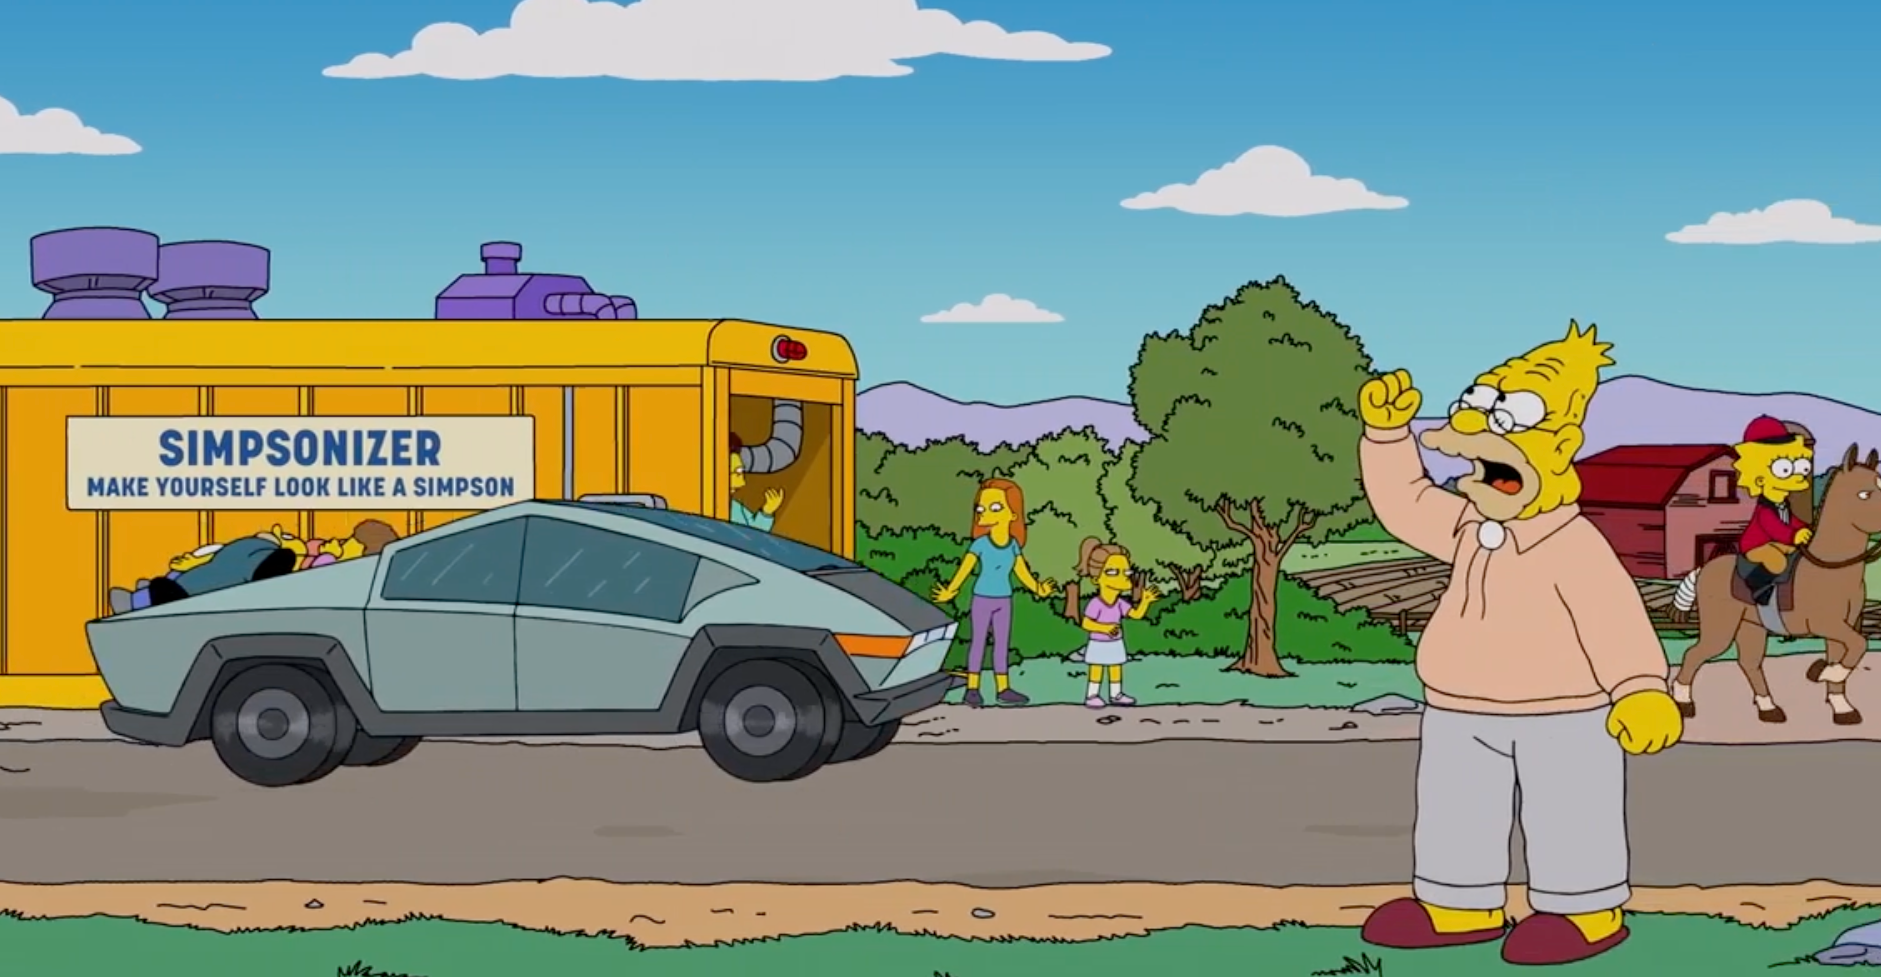 Tesla Cybertruck Featured On 'The Simpsons' Episode Ahead Of The EV's 2023 Release